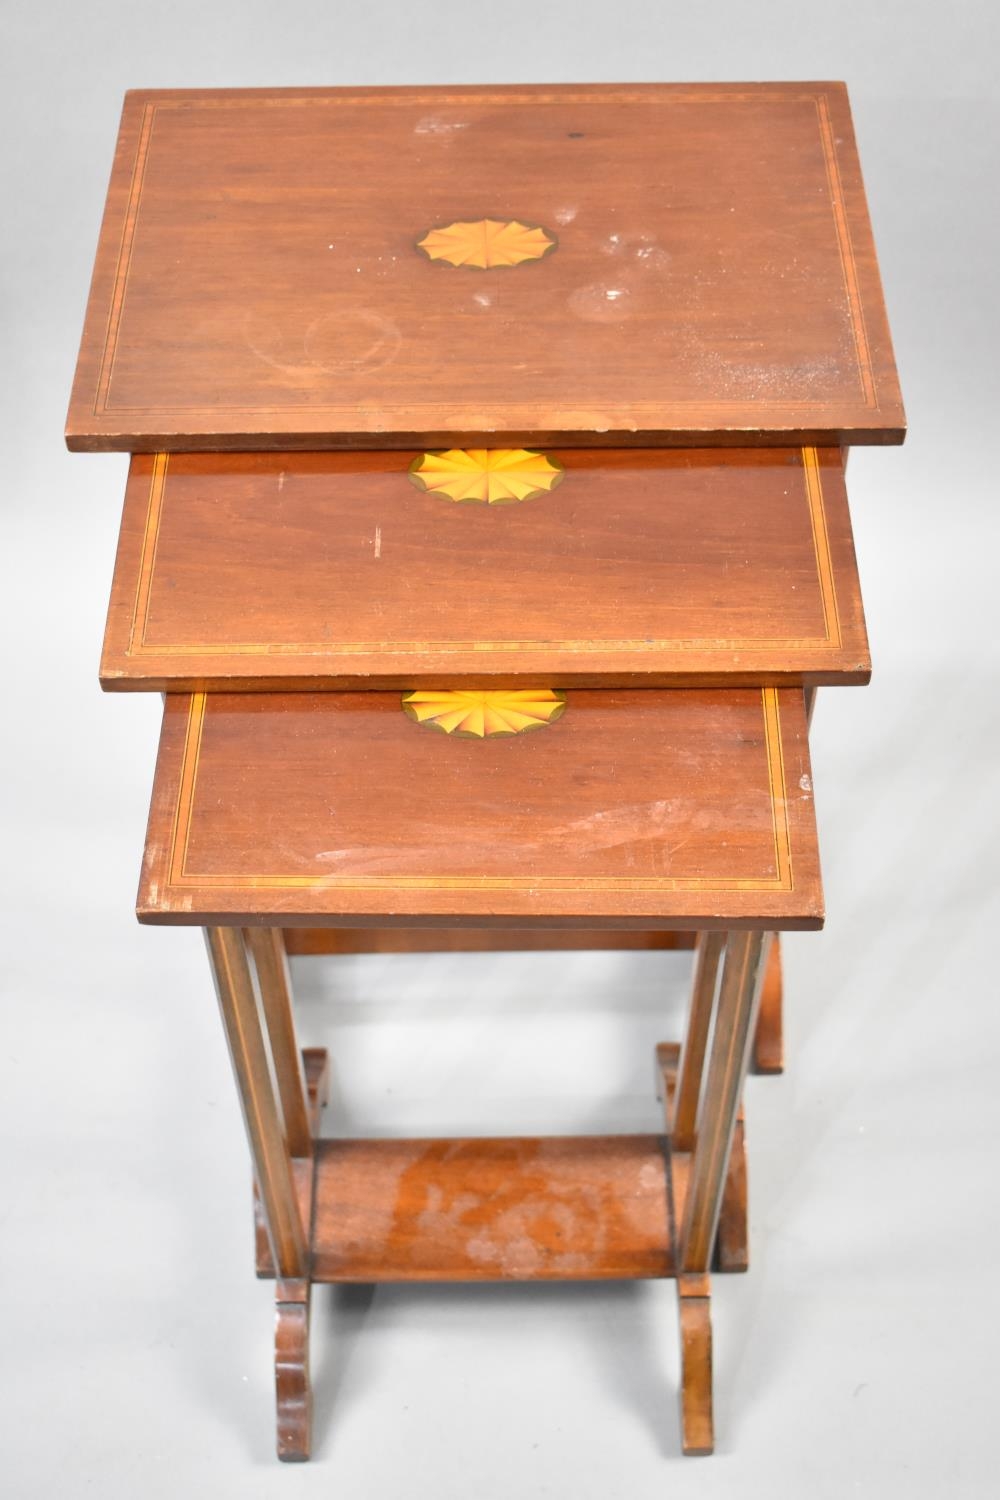 A Mahogany String Inlaid Nest of Three Tables, the Tops with Central Inlaid Fan Decoration, 41x61cms - Image 2 of 2